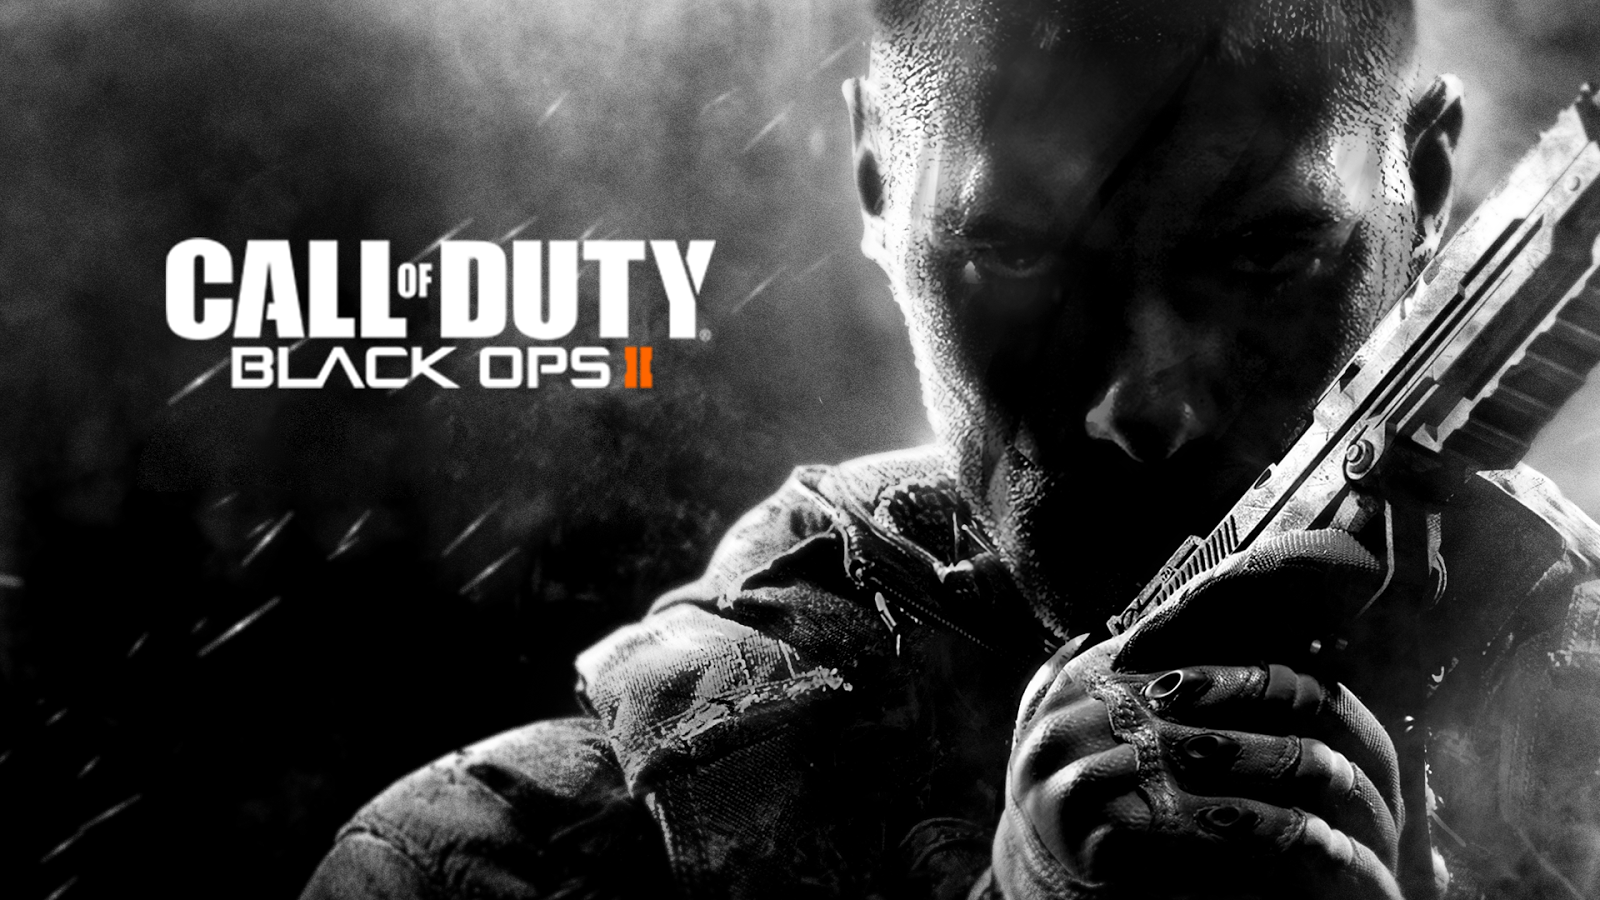 Call Of Duty Black Ops 2 HD Wallpapers   Walls720 1600x900